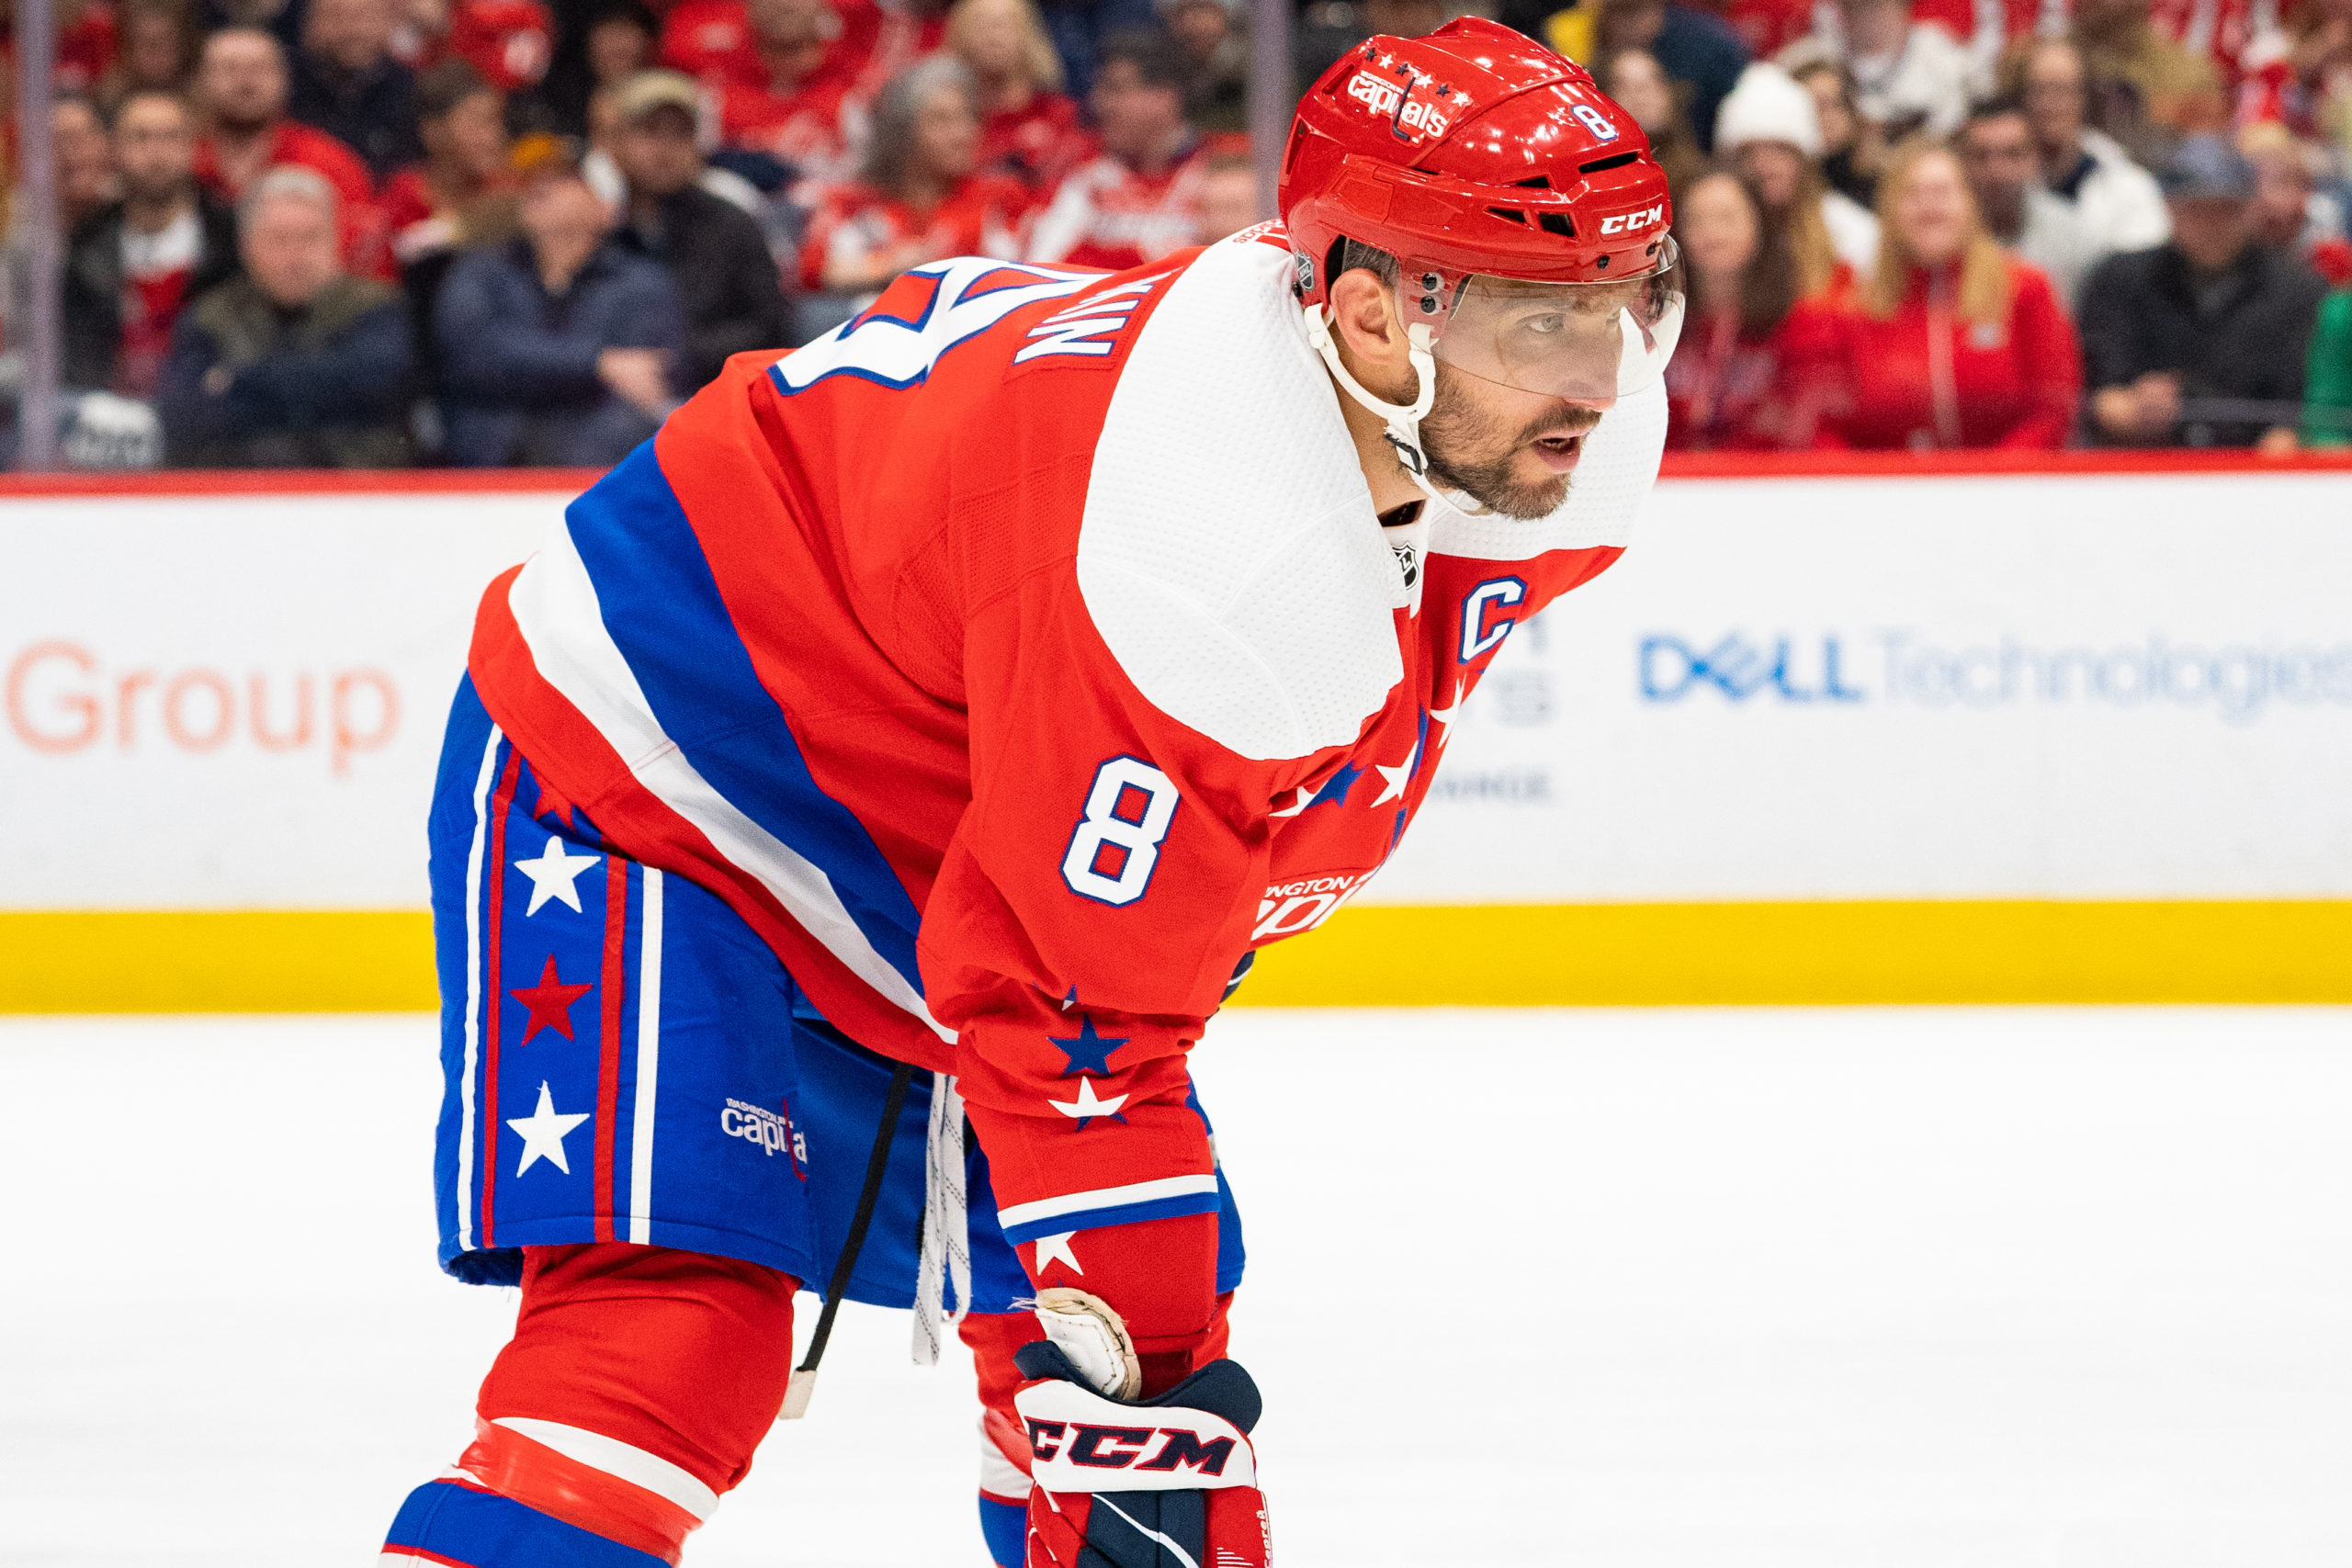 What can we expect from the Capitals and Alex Ovechkin in 2021-22?